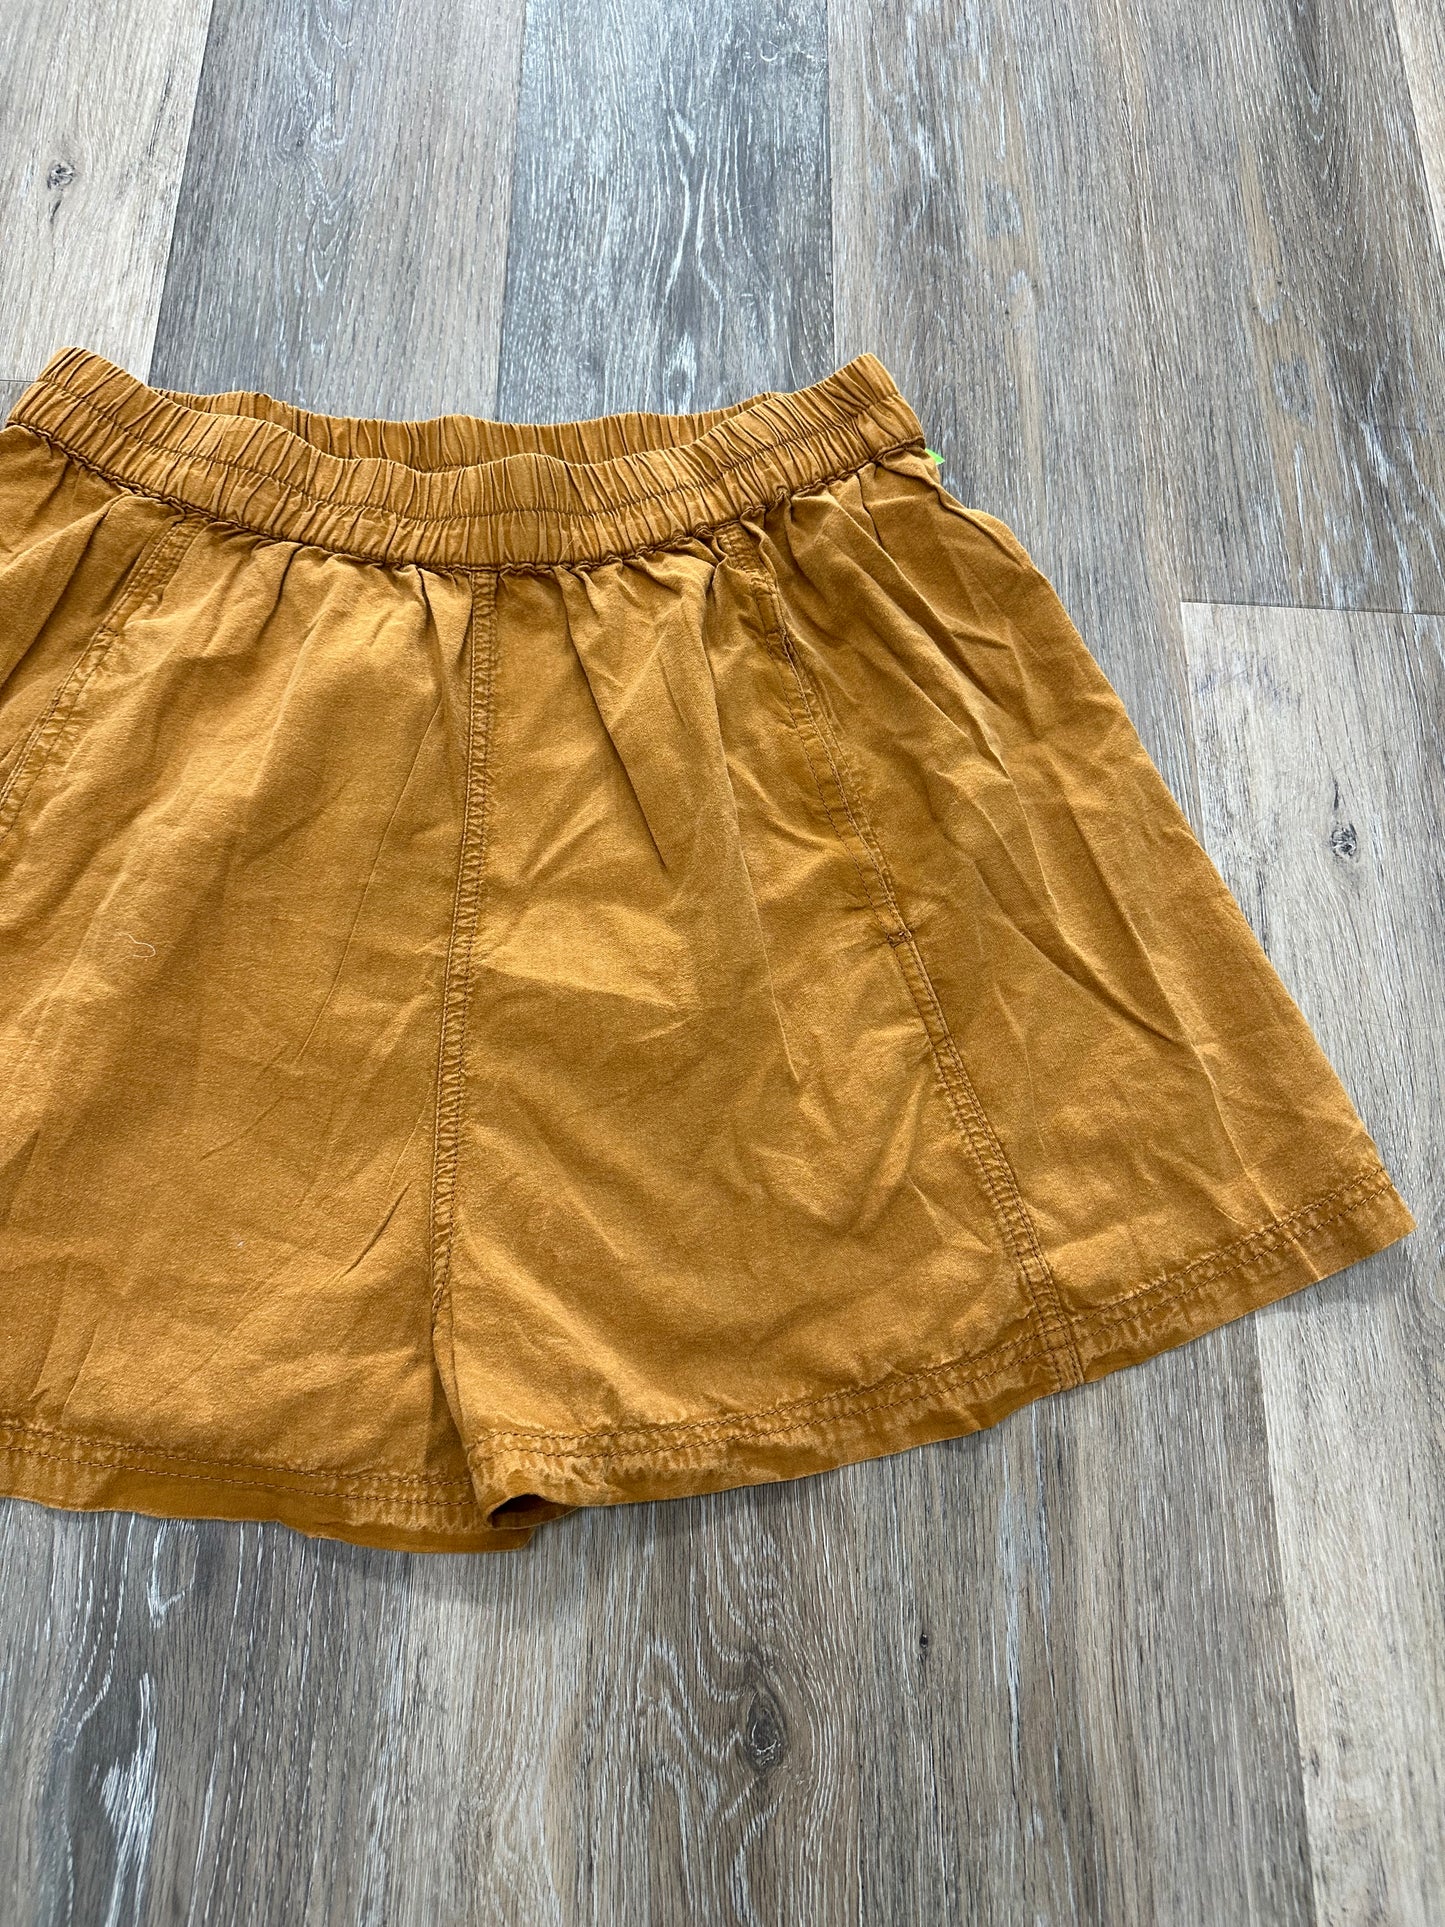 Shorts By Free People  Size: L